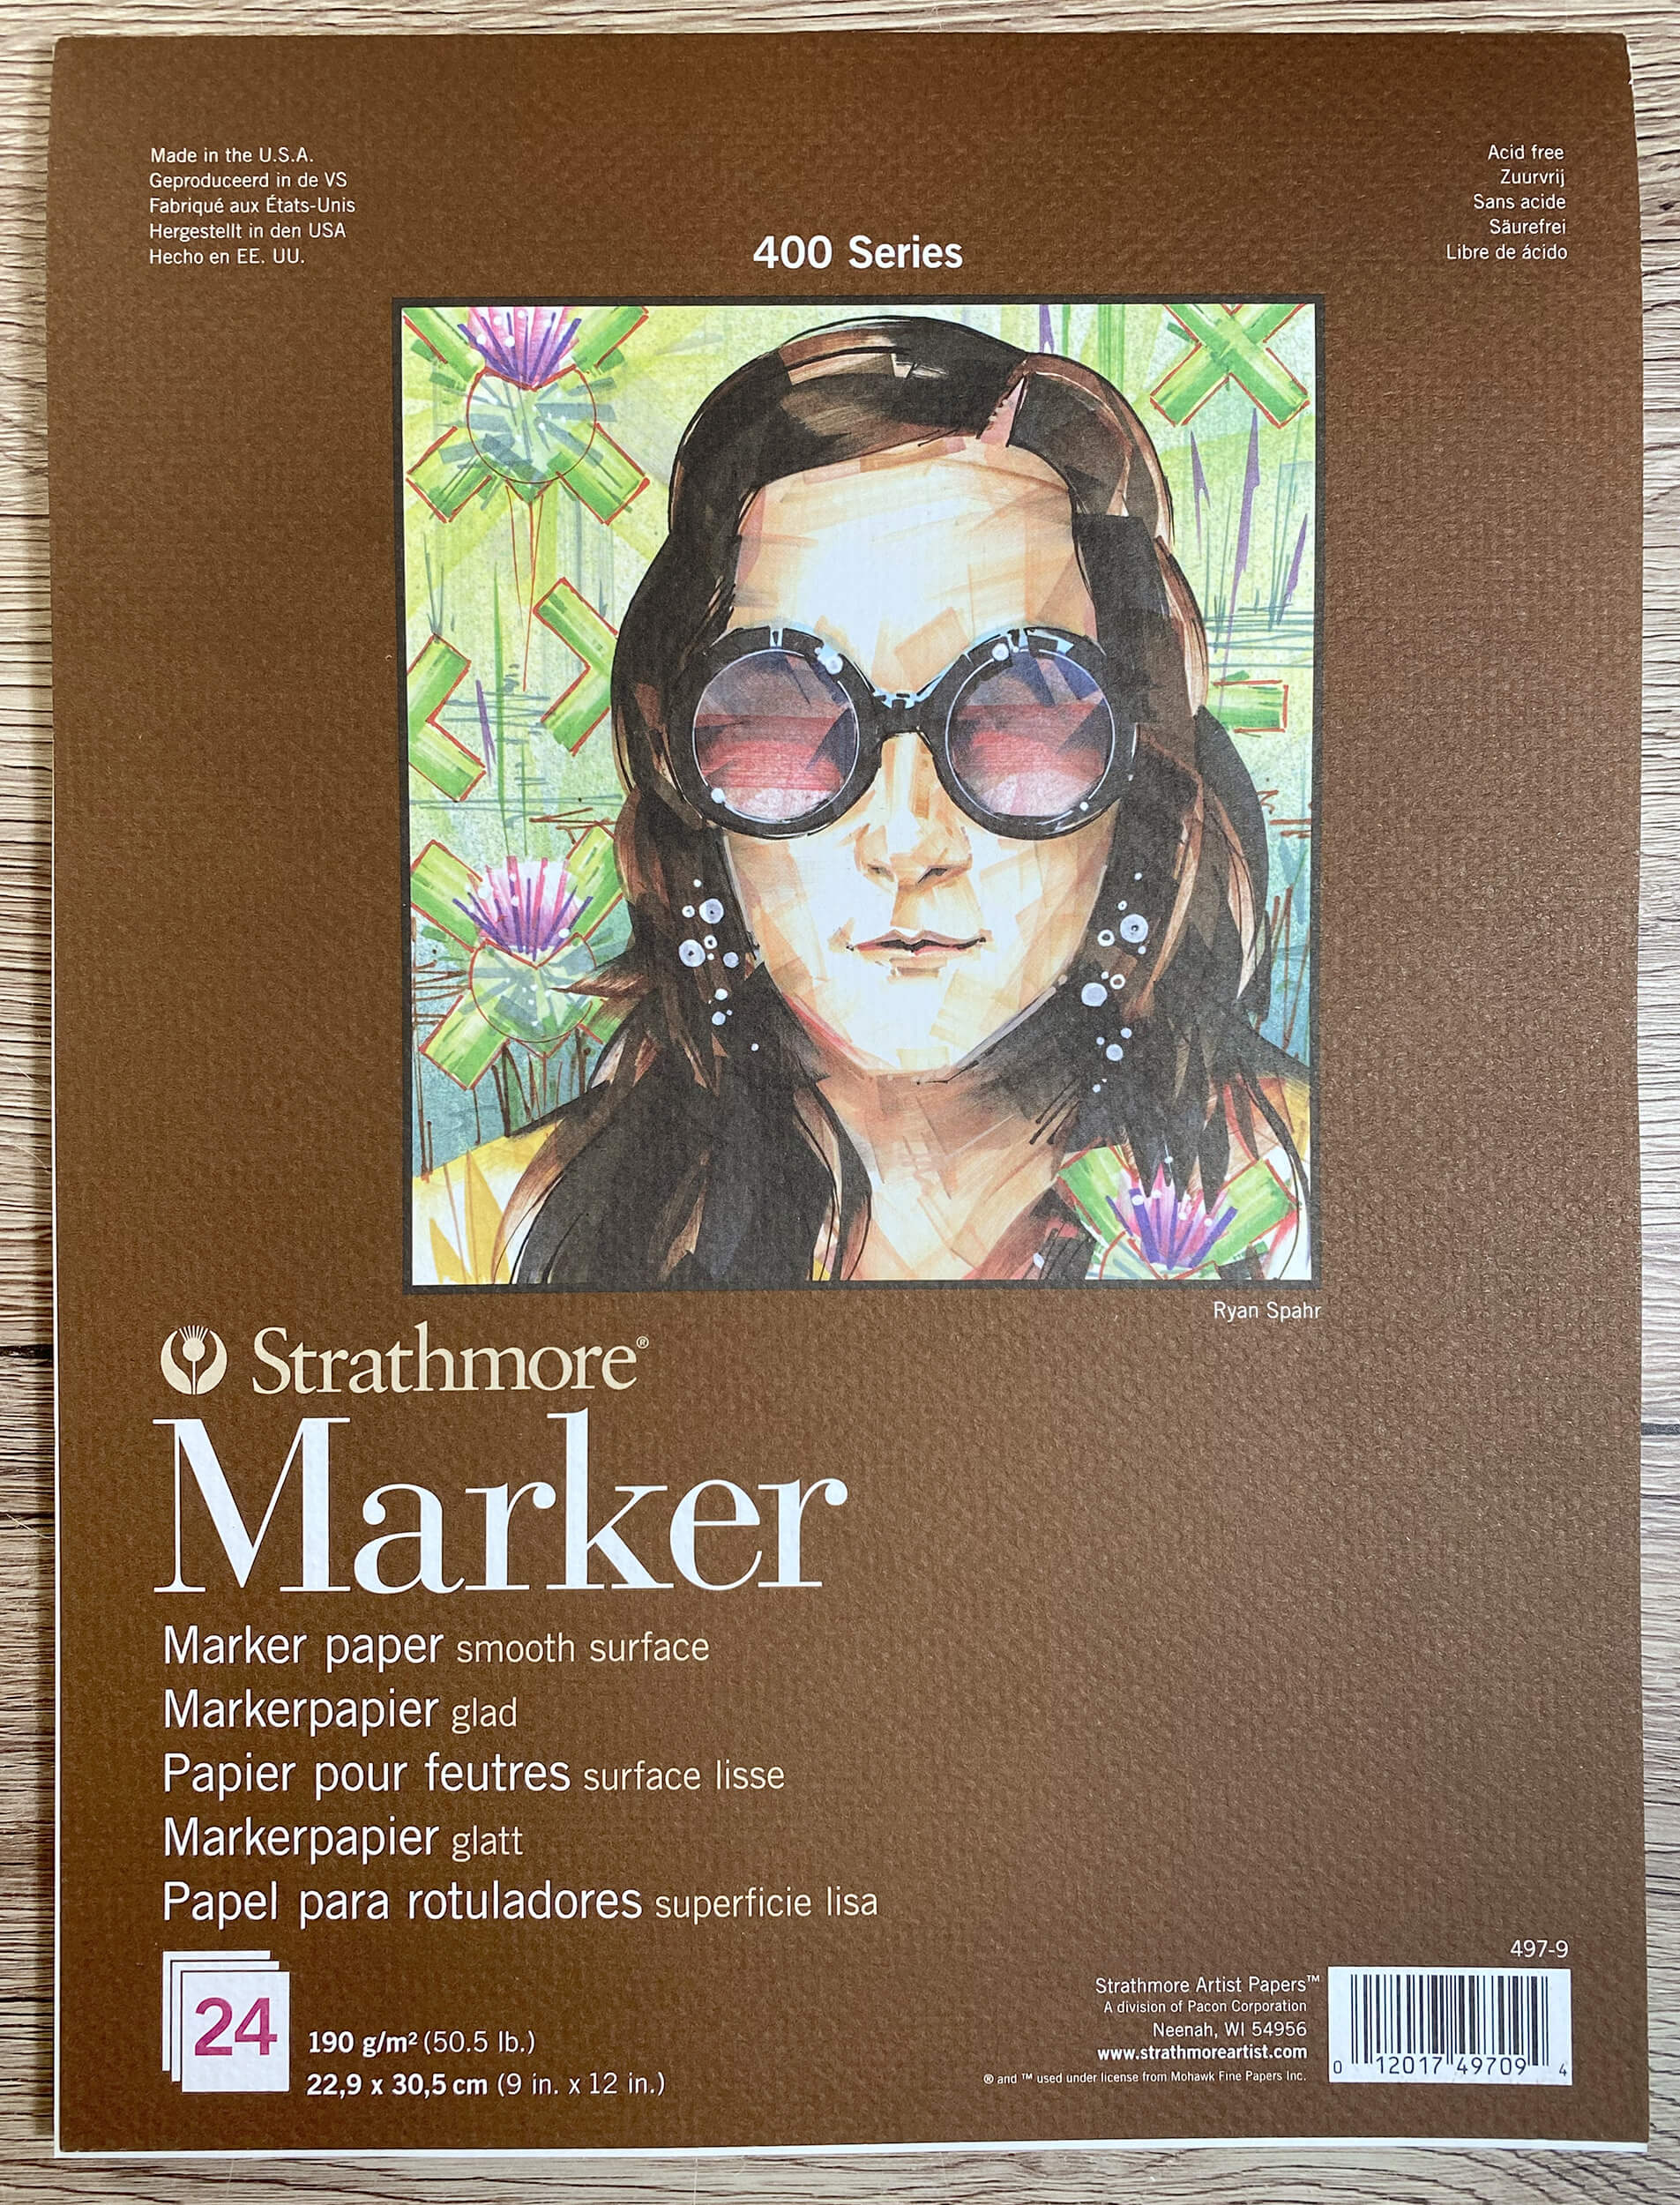 Strathmore Marker paper smooth surface 190 gsm